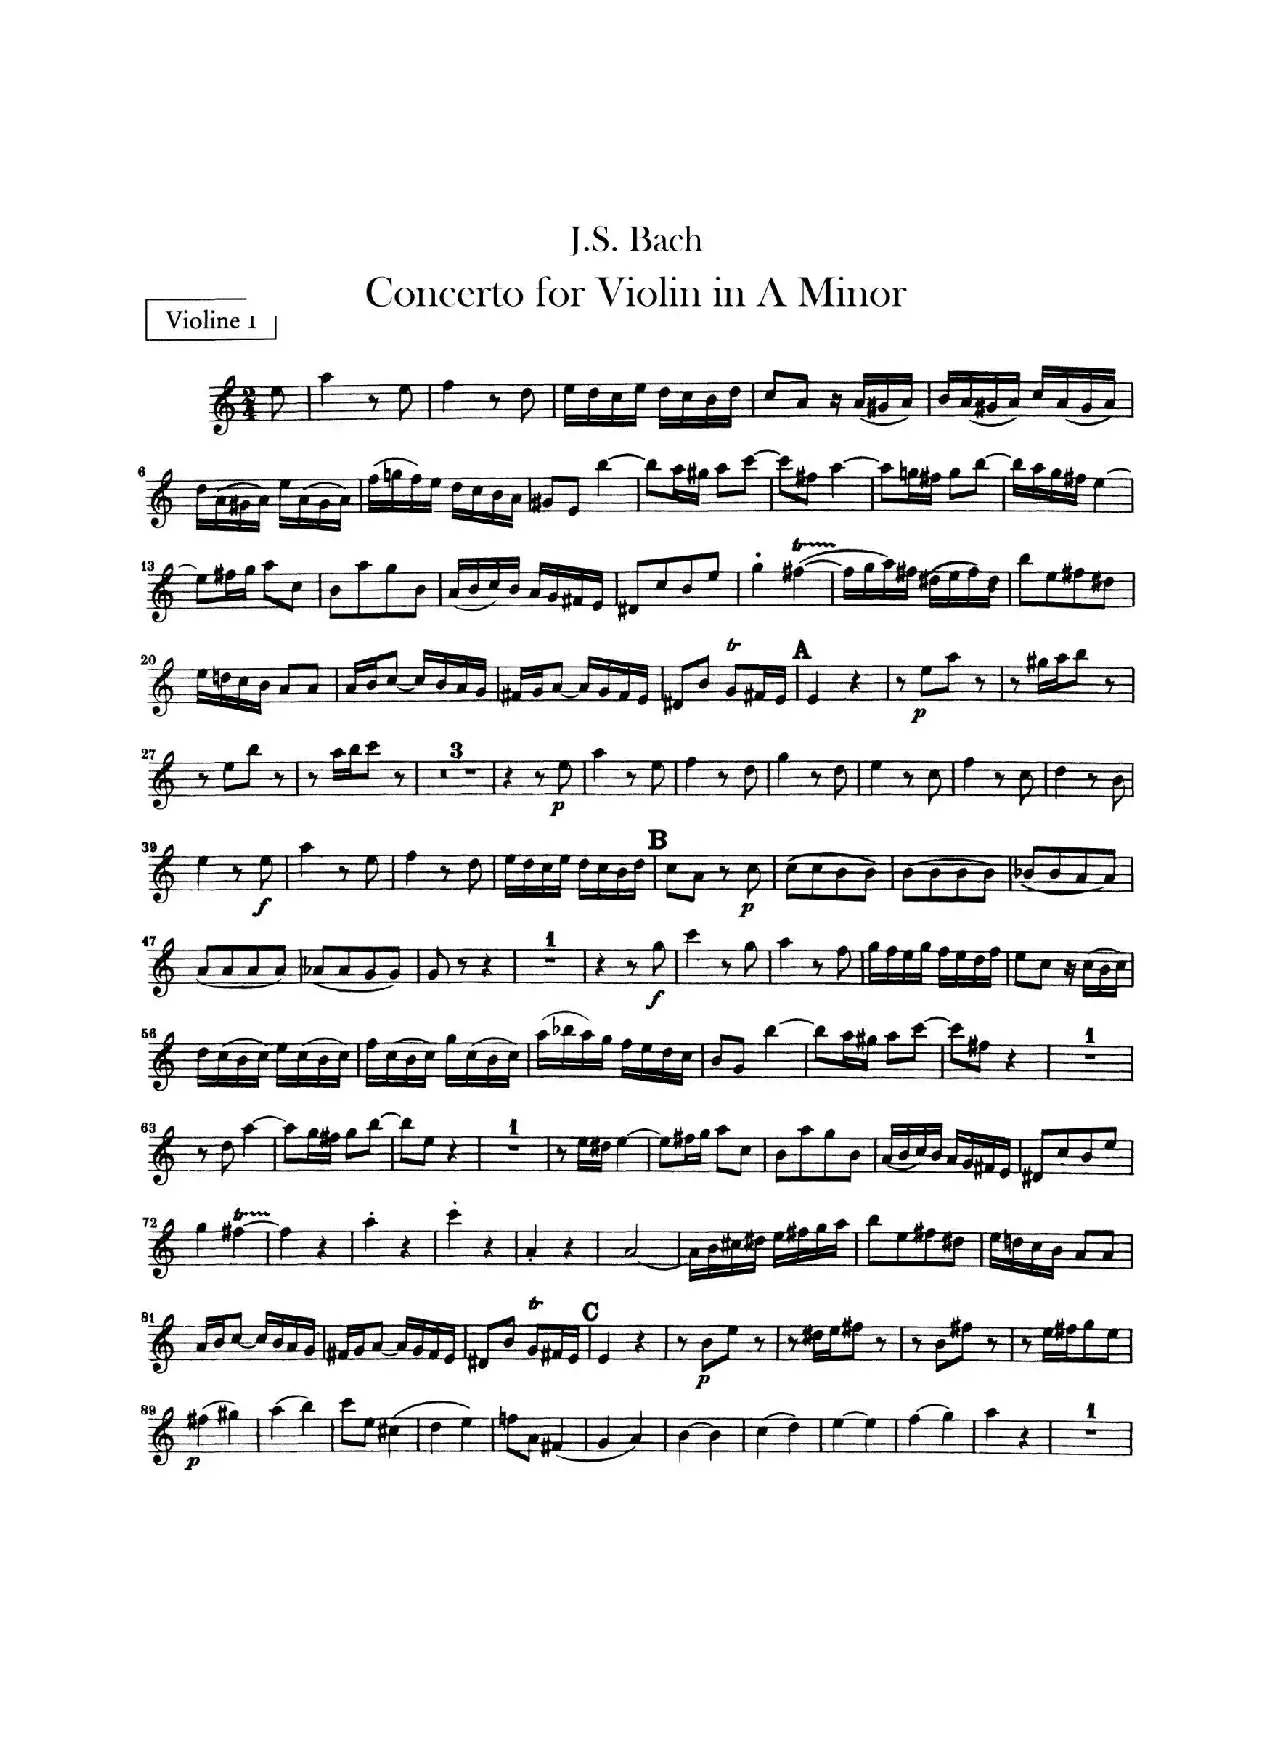 Concerto for Violin in A Minor bwv1041（第一小提琴分谱）